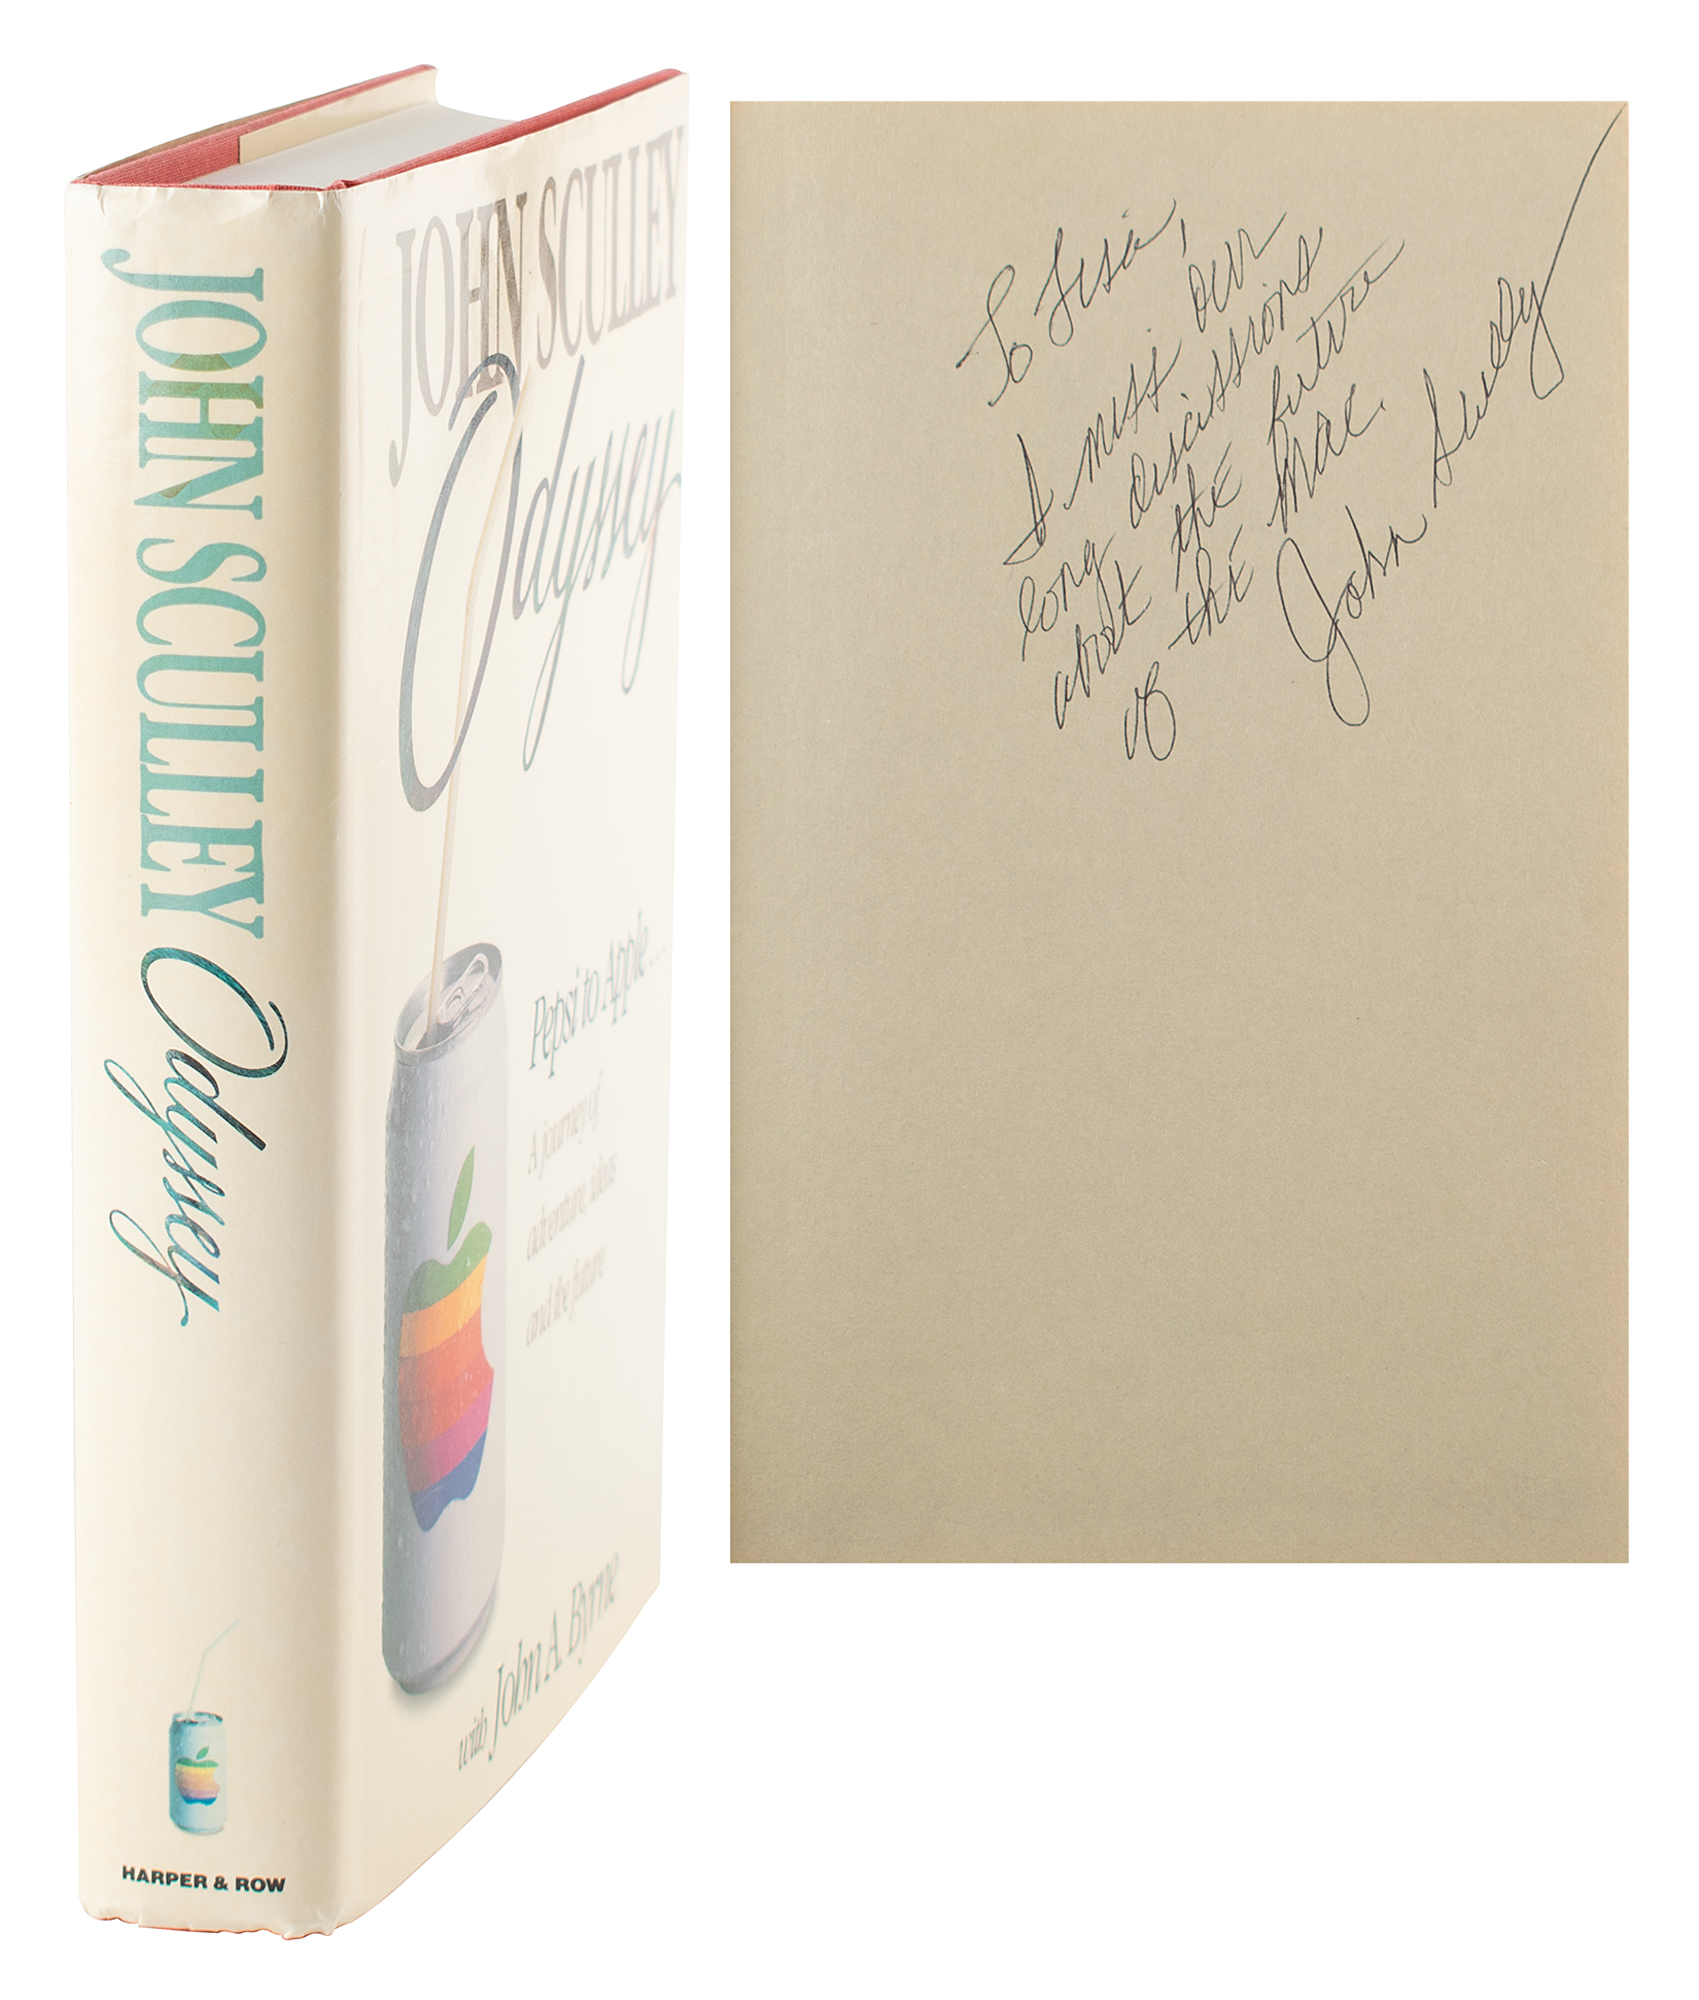 Lot #7034 John Sculley Signed Book